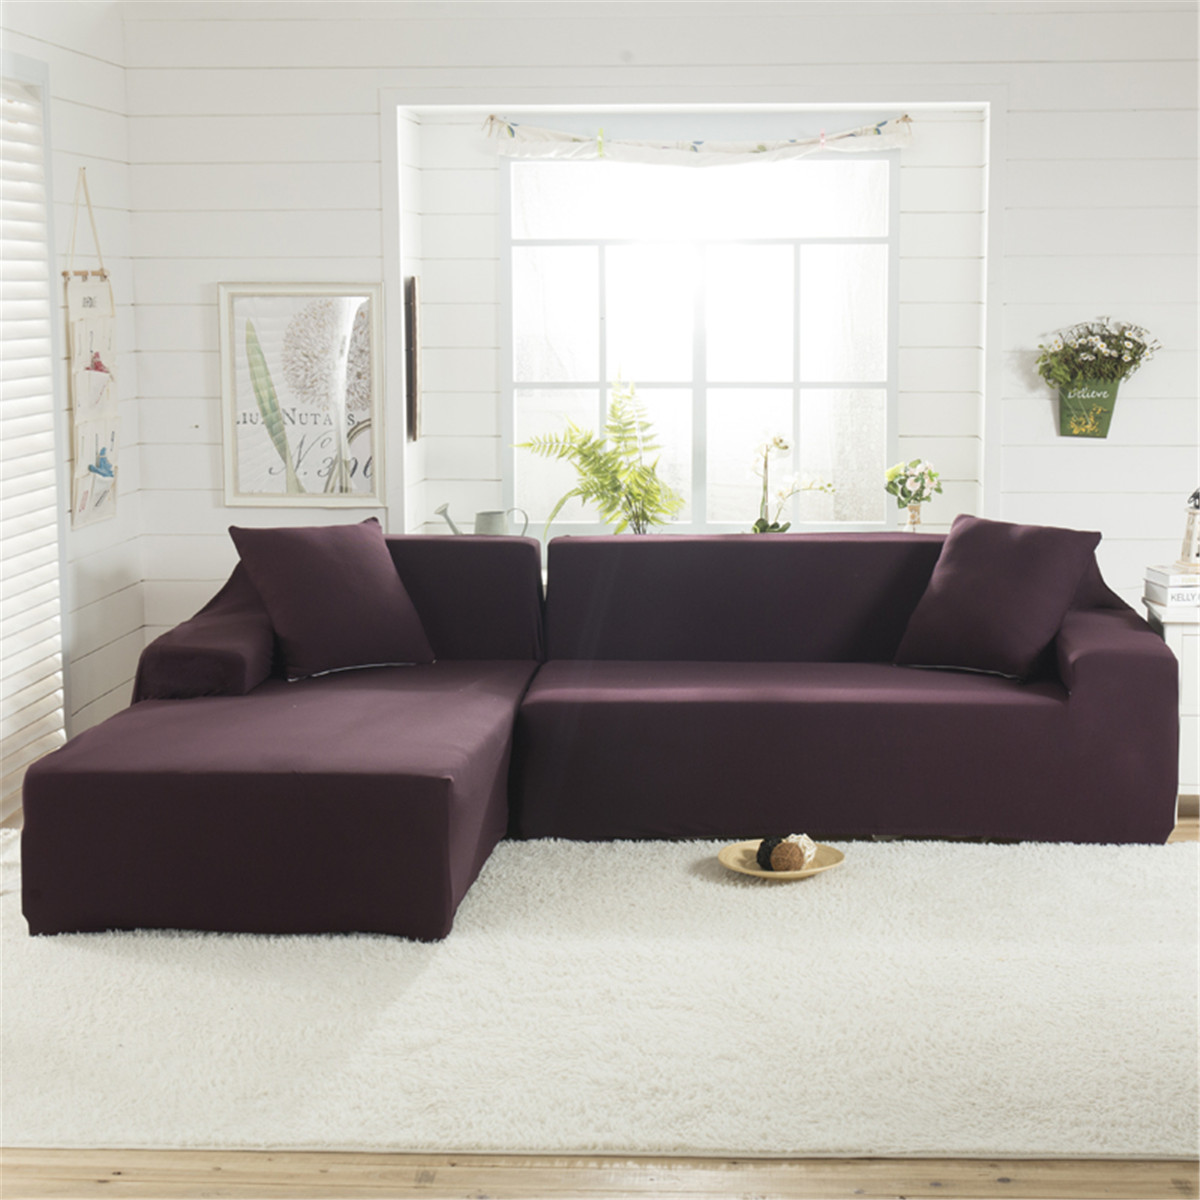 L-Shape-Couch-Cover-Stretch-Elastic-Fabric-Sofa-Cover-Pet-Sectional-Corner-Chair-Covers-1507970-2